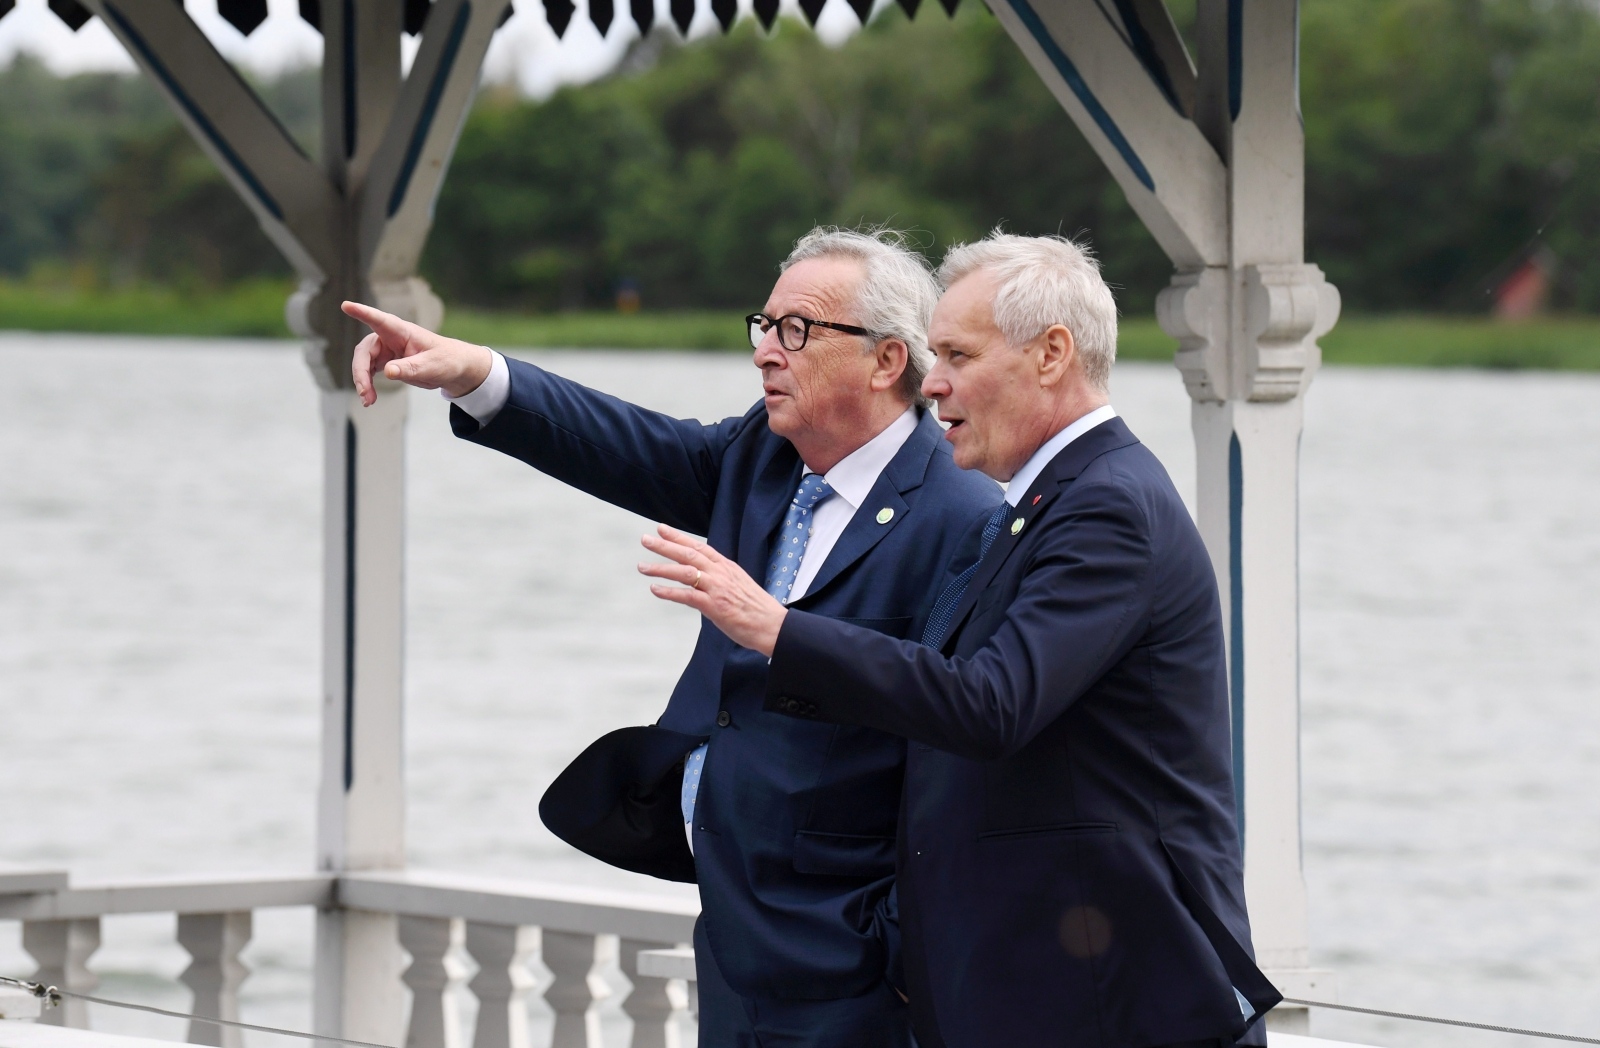 EU's Juncker visits Finland to launch EU presidency Outgoing president of the European Commission Jean-Claude Juncker (L) and Prime Minister of Finland Antti Rinne gesture during the meeting of the Finnish ministers and the commissioners at the Prime Minister's official residence Kesäranta in Helsinki, Finland July 4, 2019. Jussi Nukari/Lehtikuva/via REUTERS      ATTENTION EDITORS - THIS IMAGE WAS PROVIDED BY A THIRD PARTY. NO THIRD PARTY SALES. FINLAND OUT. LEHTIKUVA